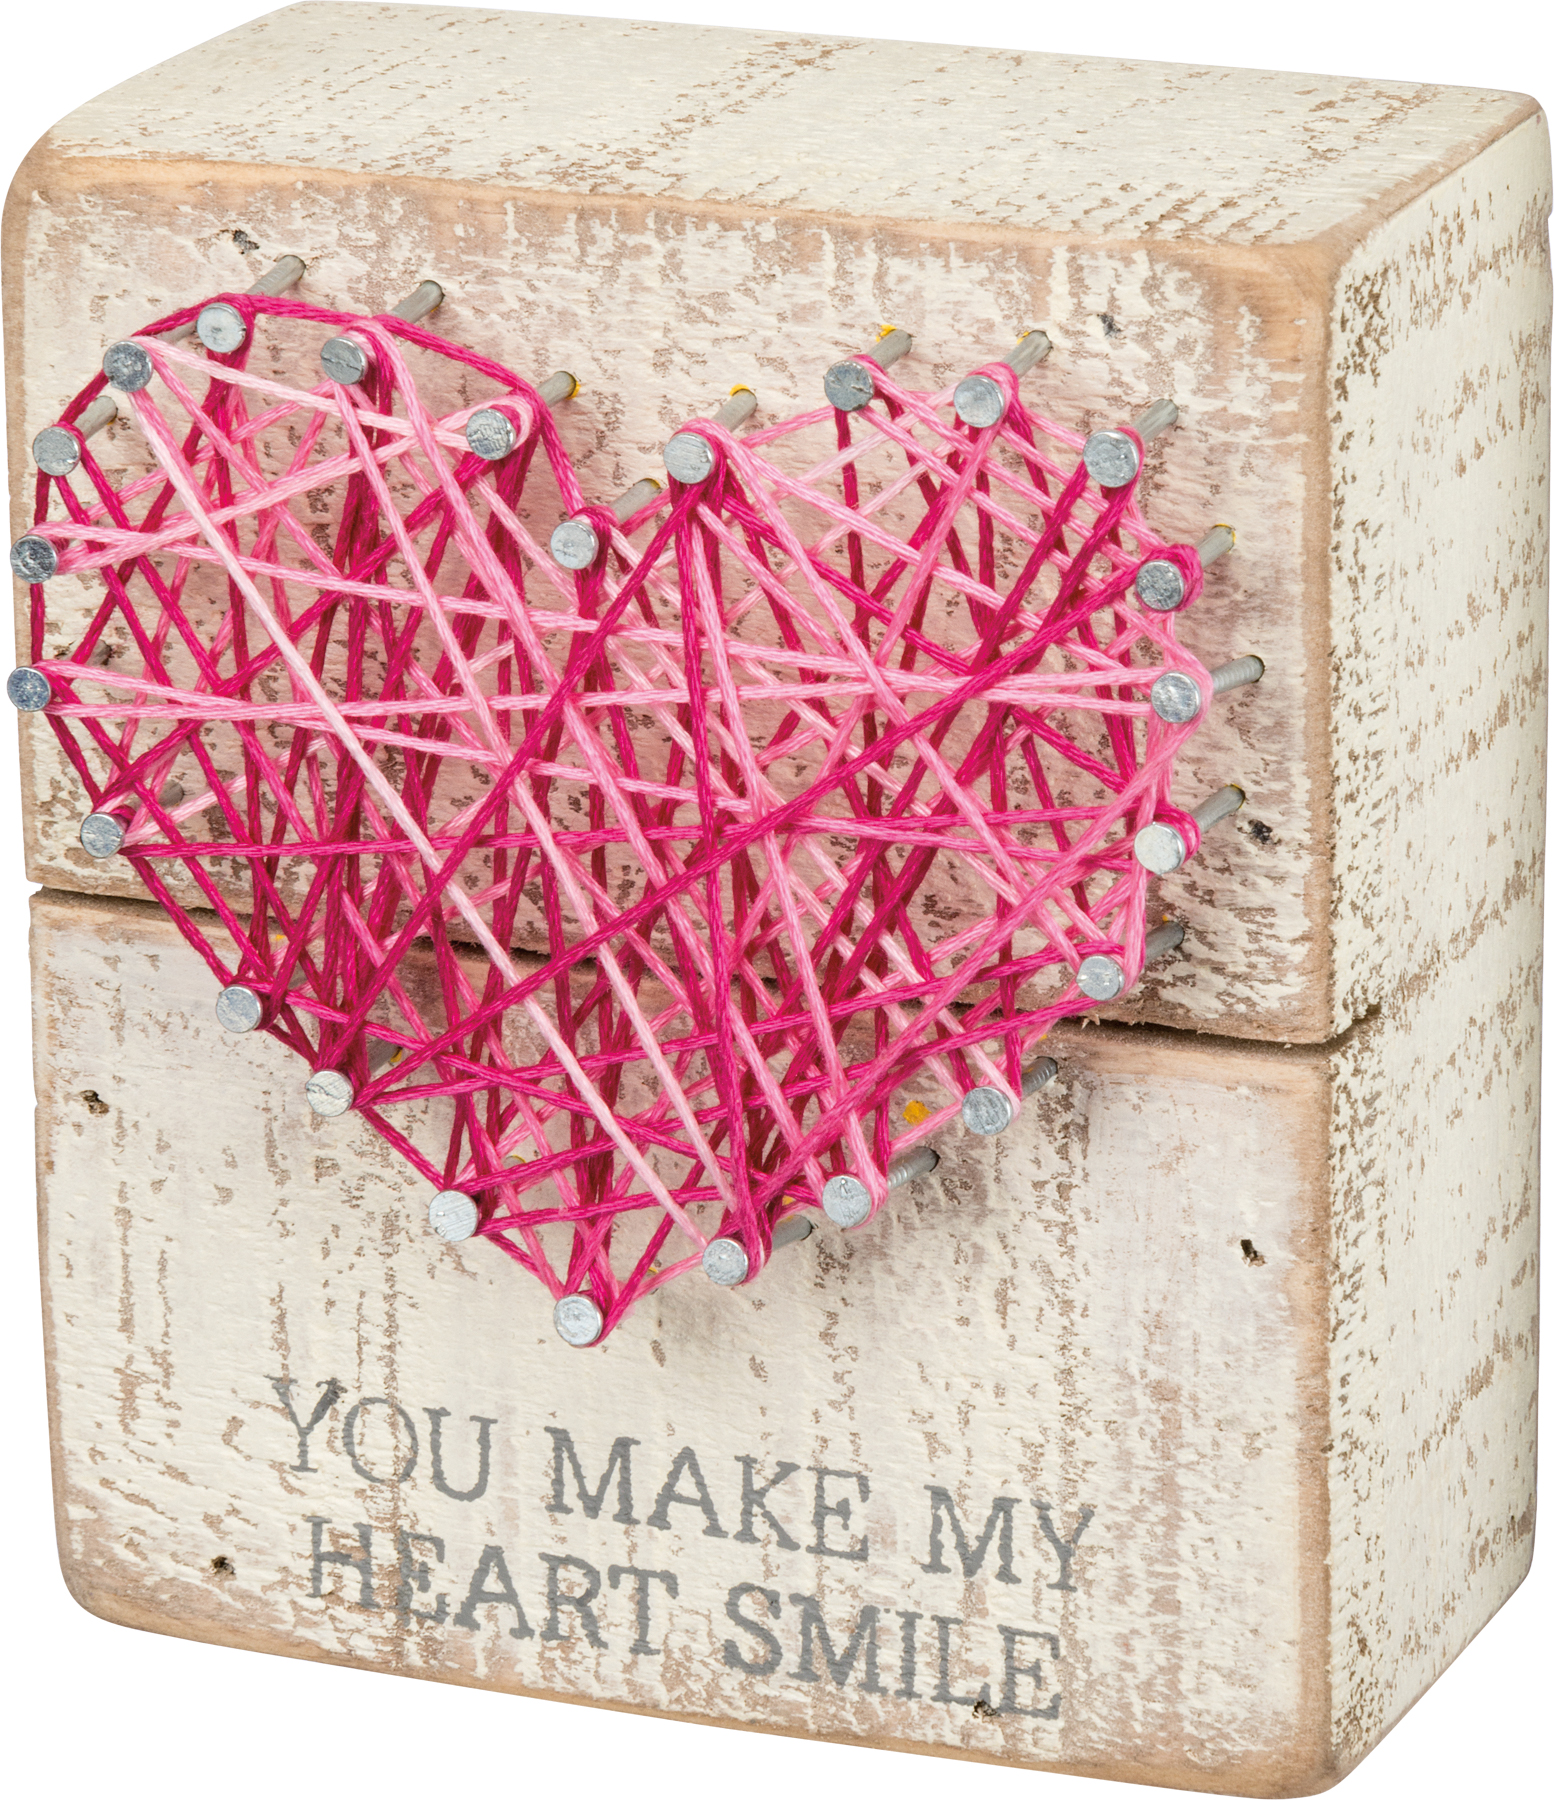 Art Hearts 1003480190 You Make My Heart Smile for sale online 